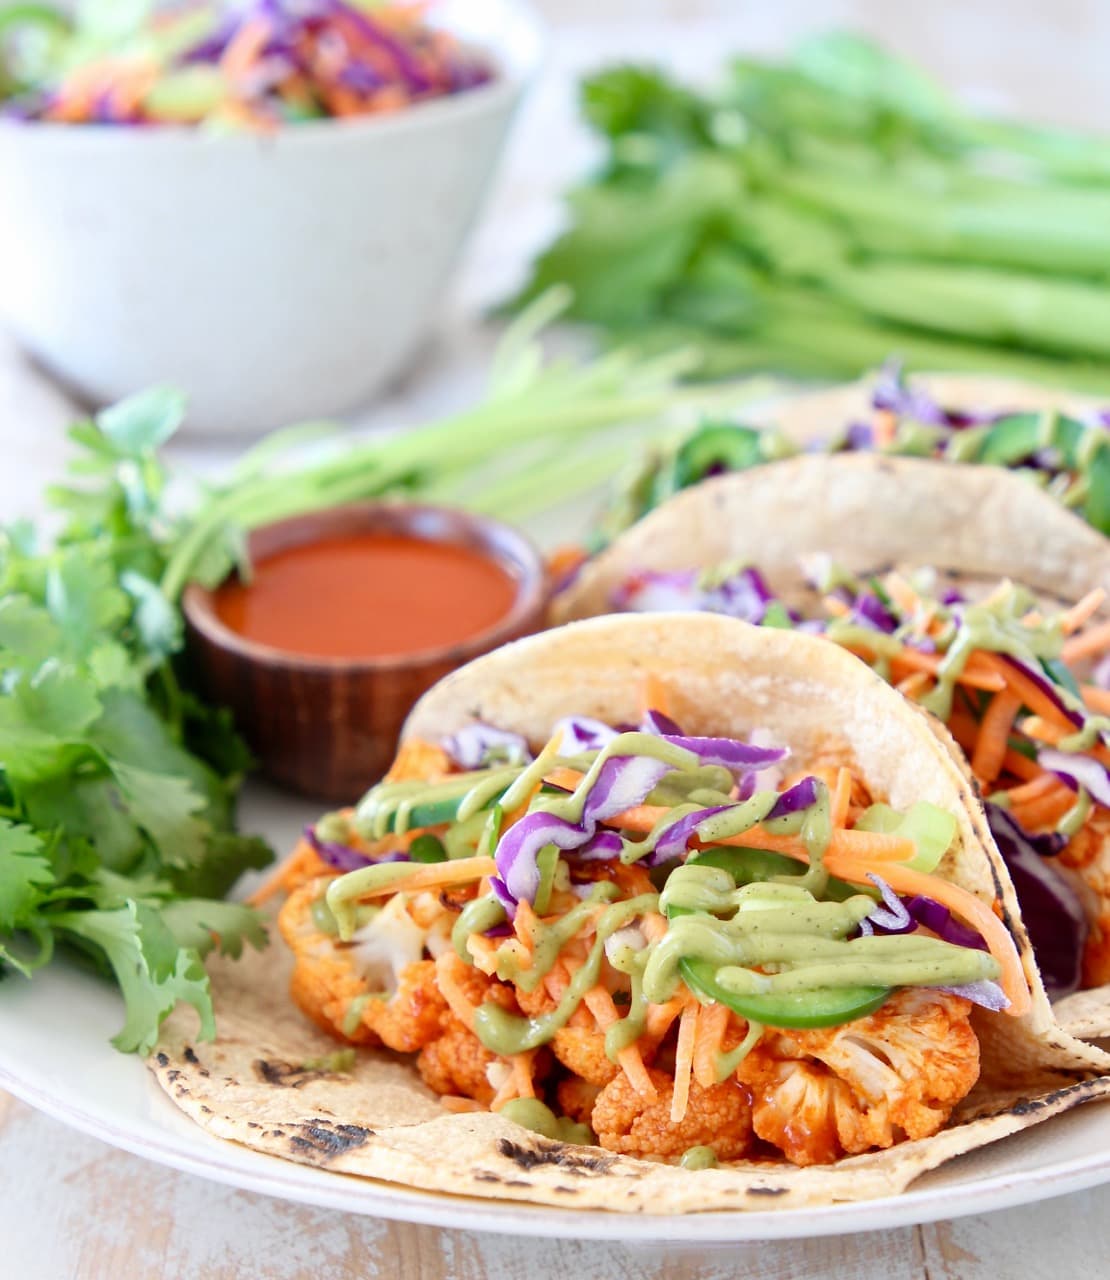 Buffalo Cauliflower Tacos in Corn Tortillas with Jalapeno Slaw and Avocado Sauce on plate with small bowl of buffalo sauce and fresh cilantro